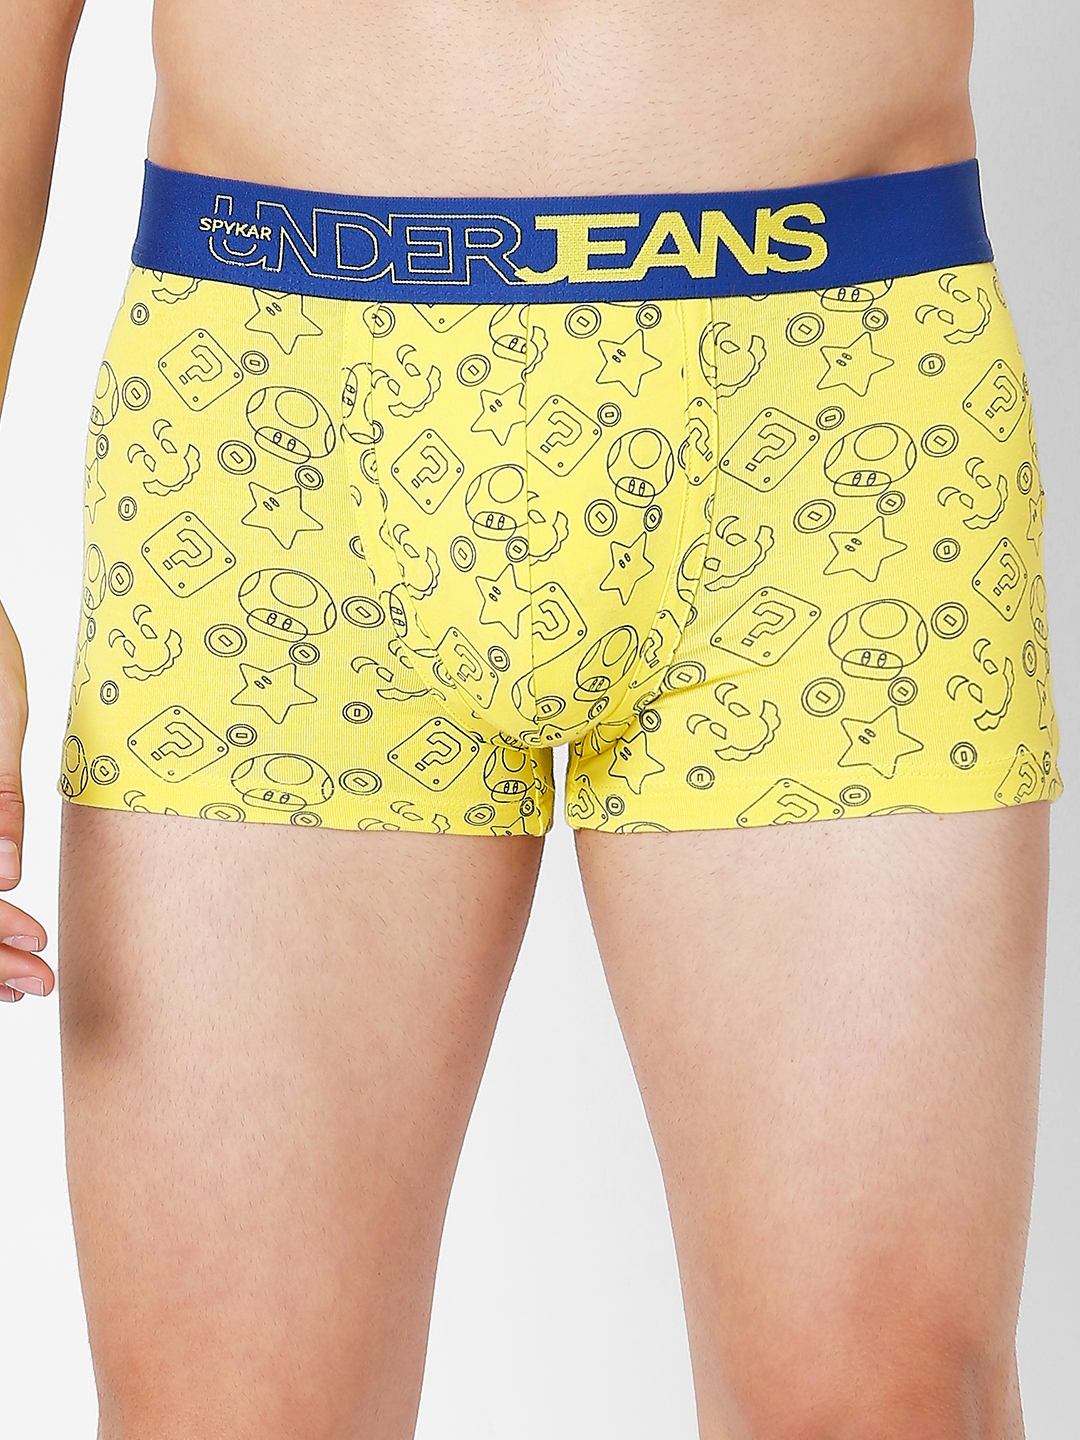 Spykar | Underjeans by Spykar Premium Red Yellow & White Cotton Blend Printed Trunk - Pack Of 3 1